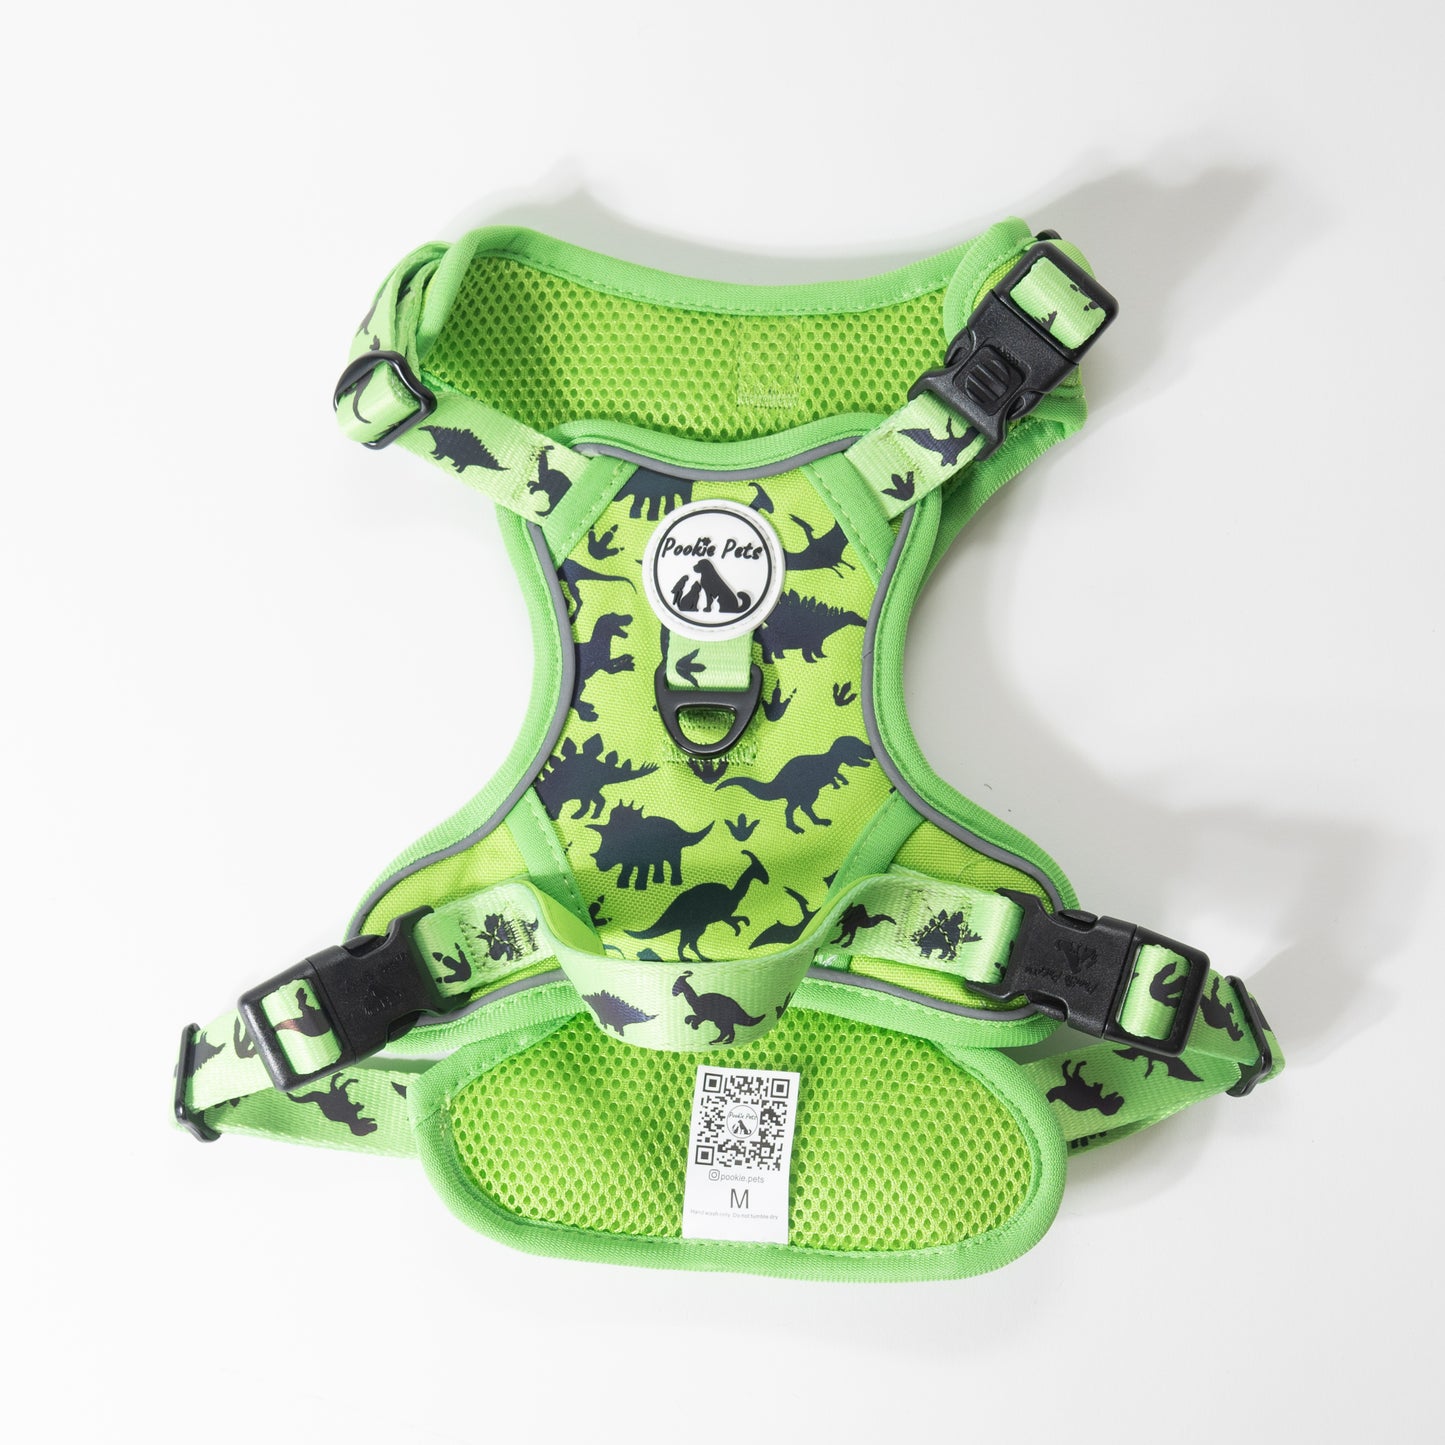 Reflective Comfort Explorer Harness with Dinosaur Theme by Pookie Pets